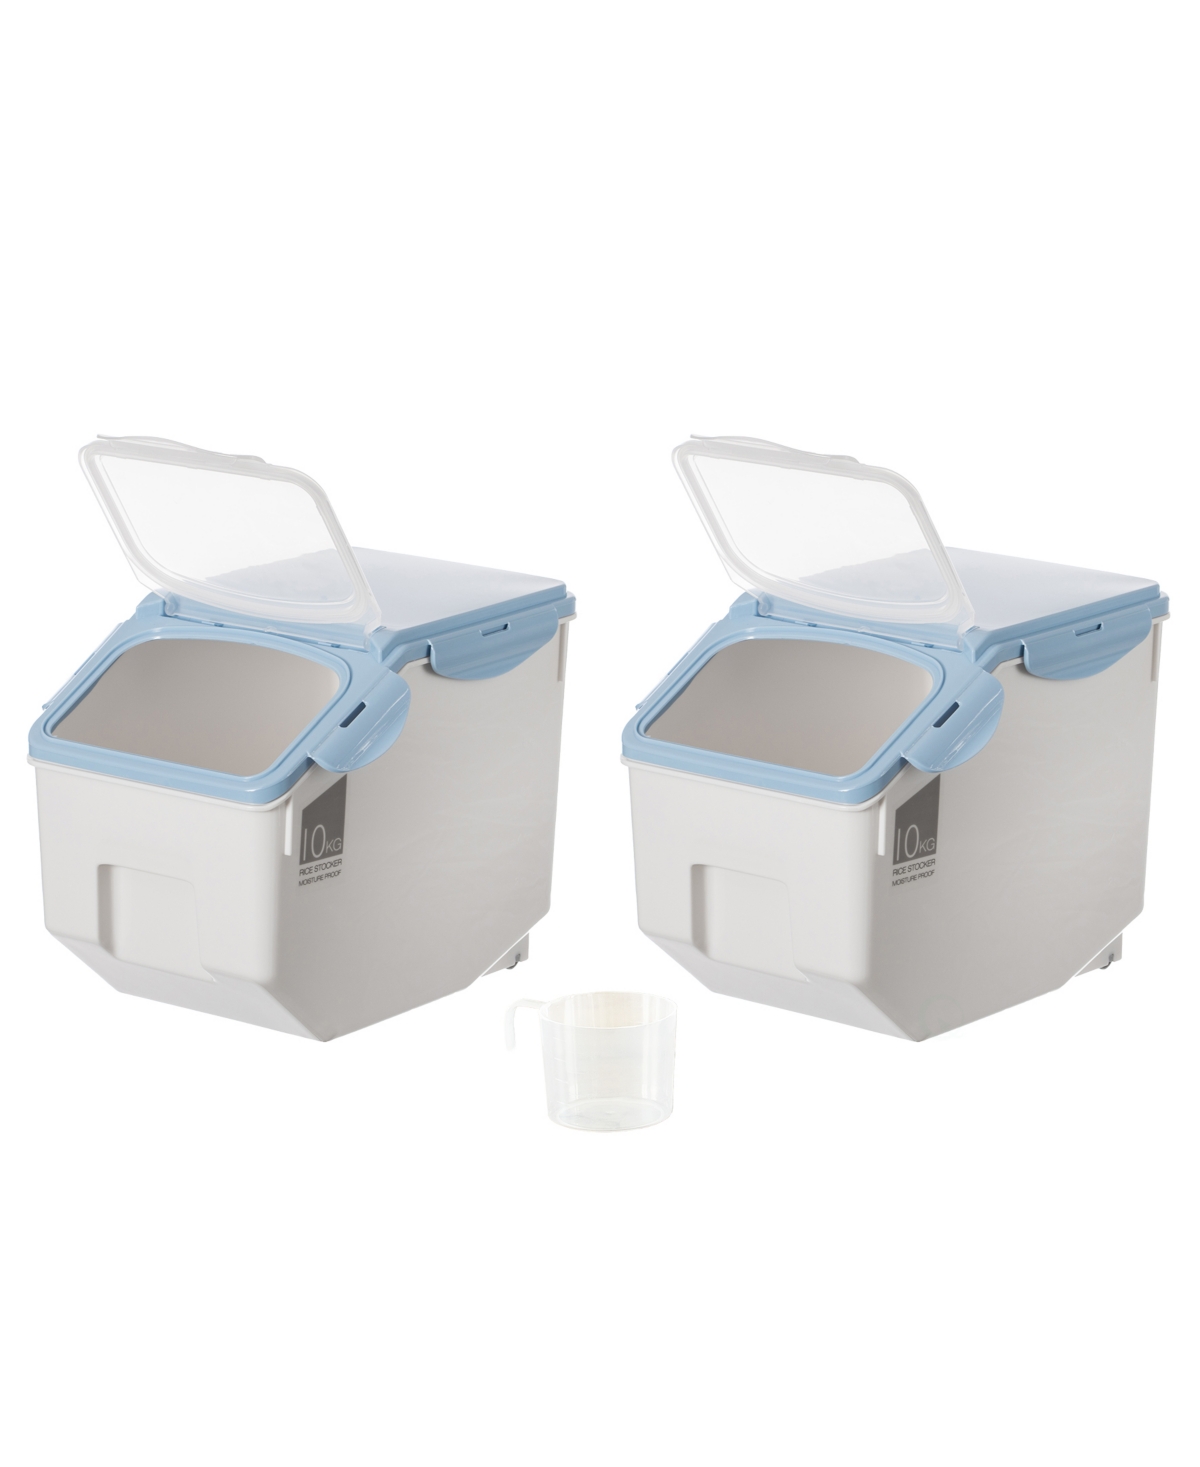 Medium Plastic Storage Food Holder Containers with a Measuring Cup and Wheels, Set of 3 - White